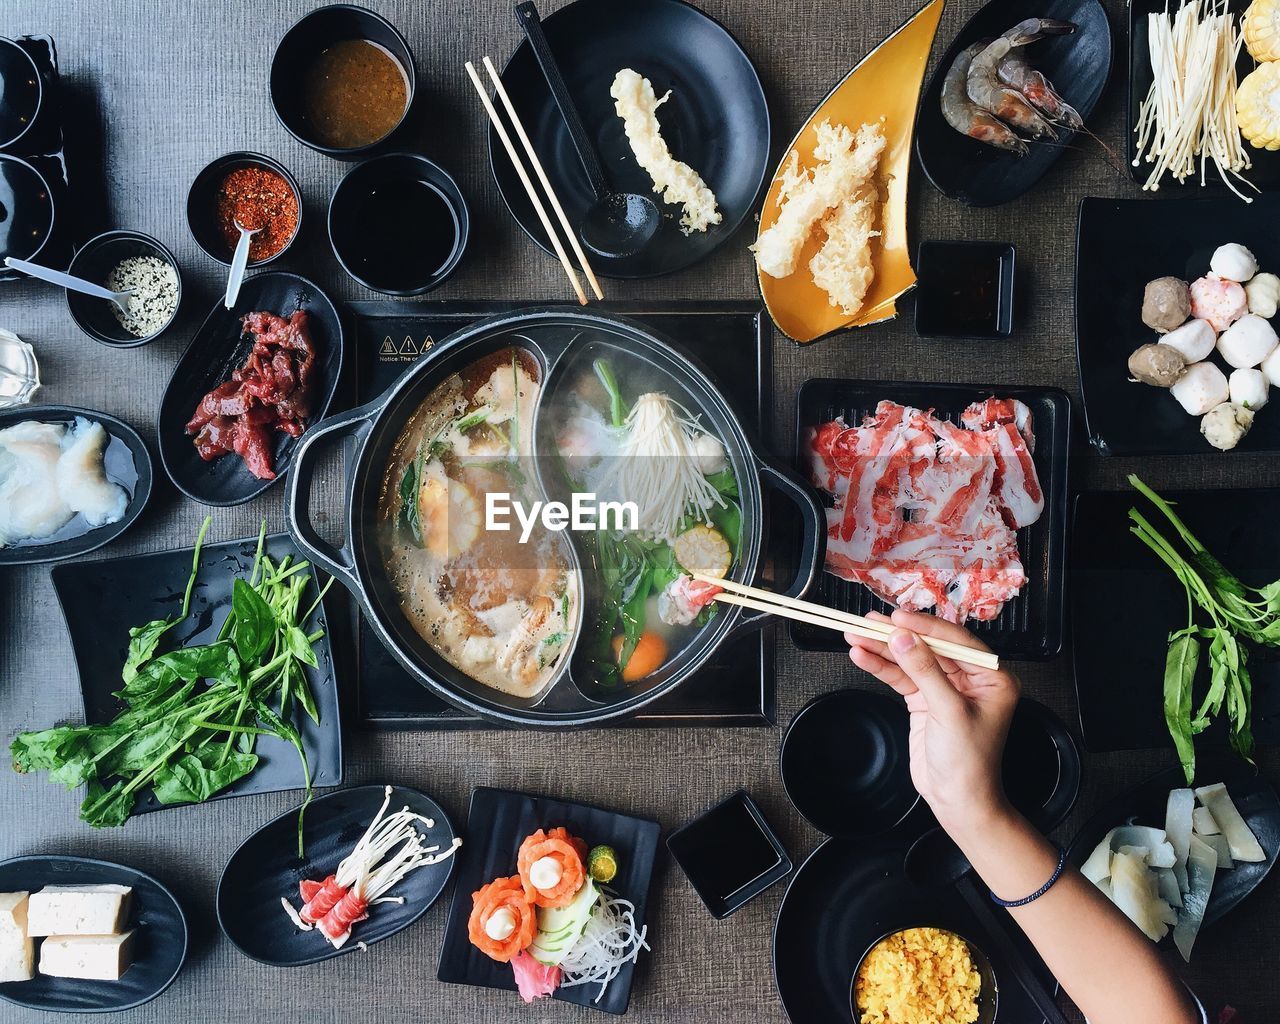 Cropped image of woman picking food from hot pot on table